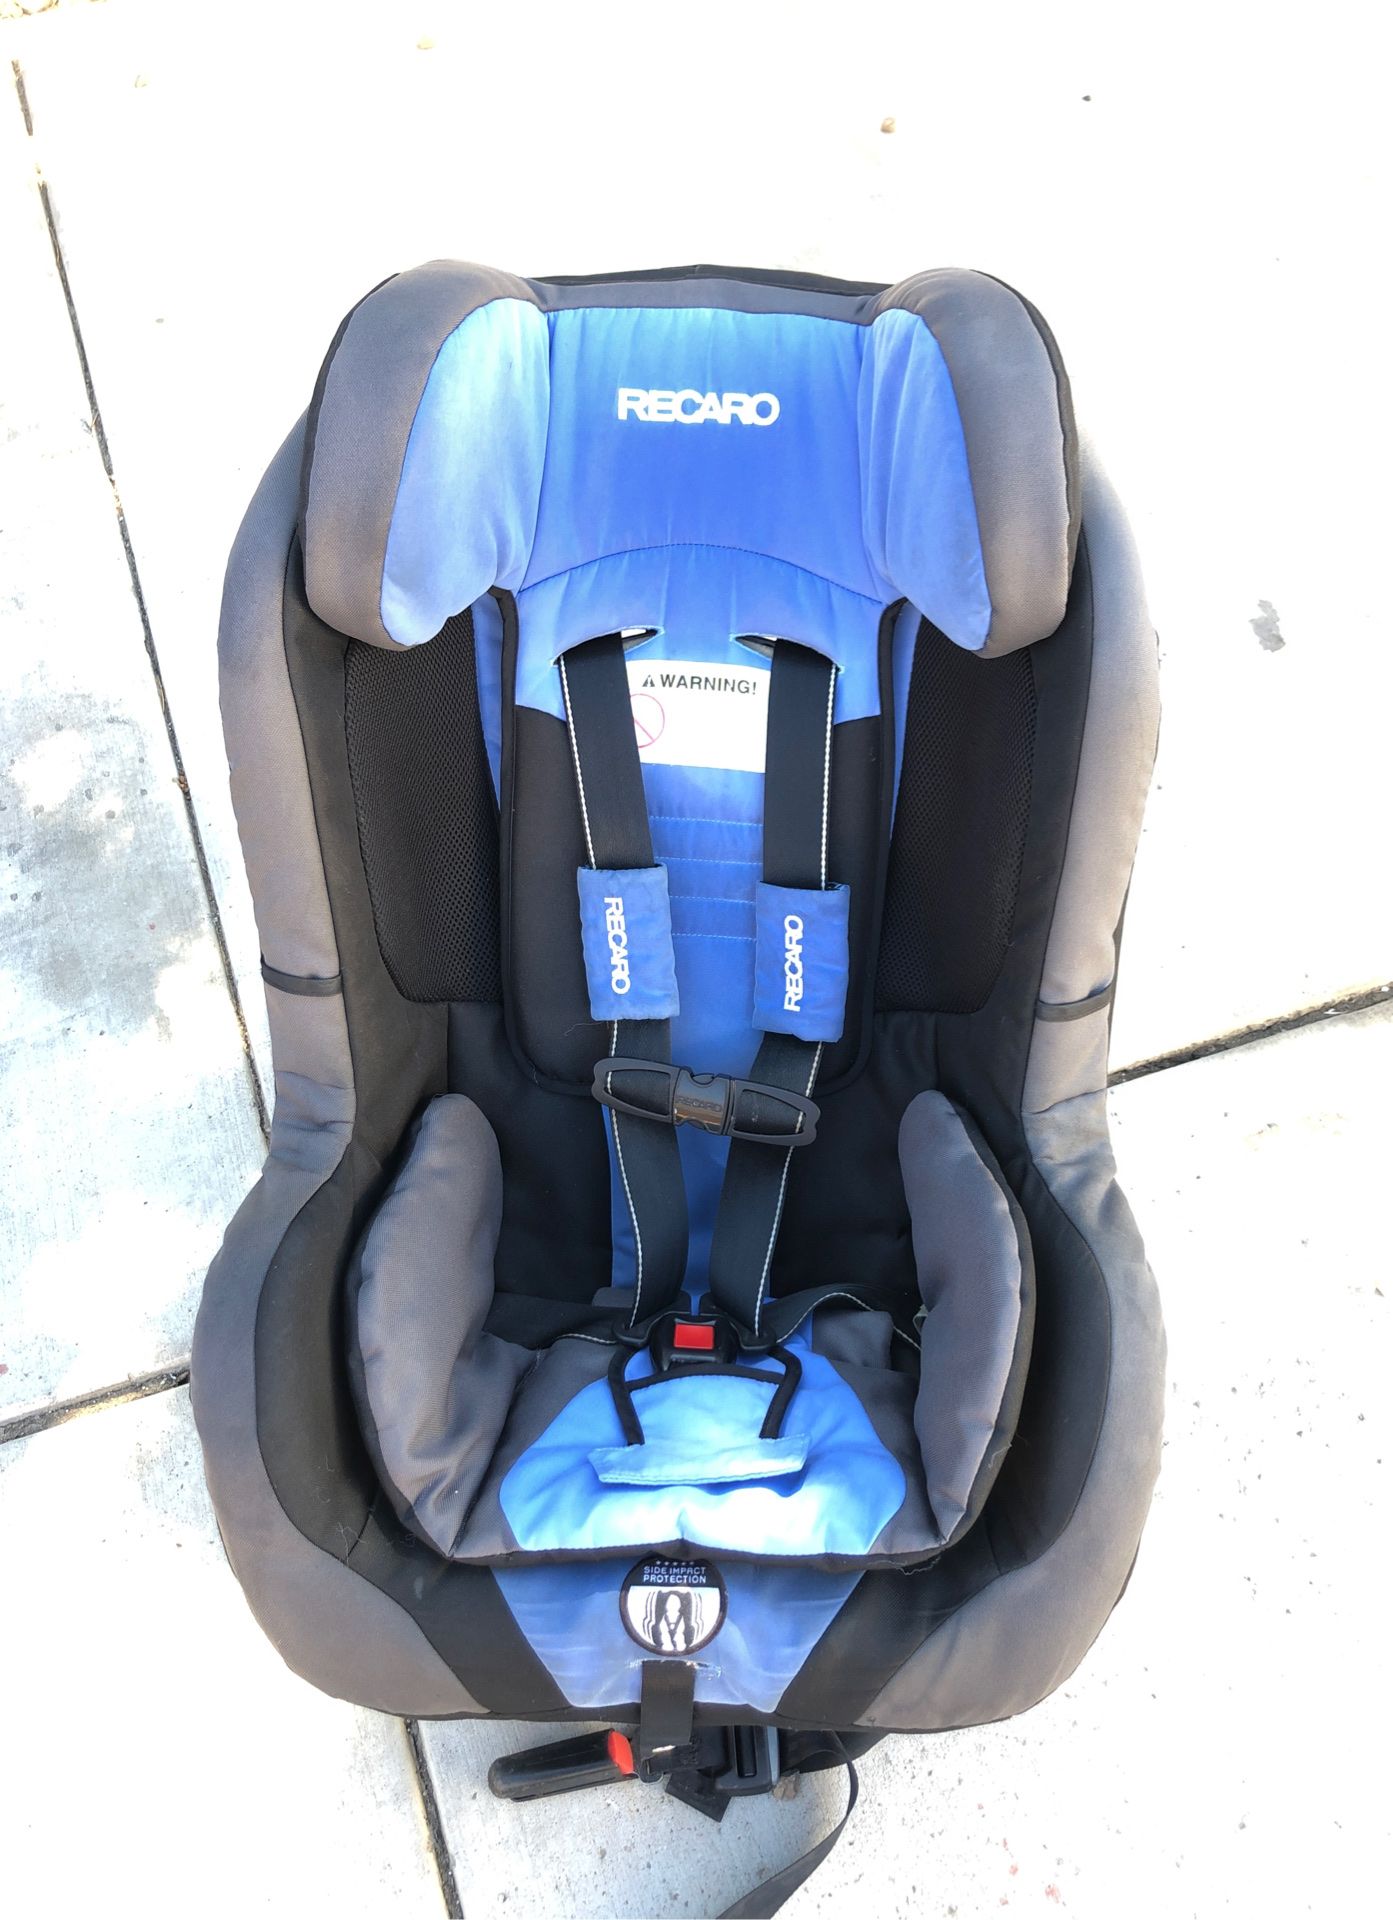 AWESOME CAR SEAT and BASE